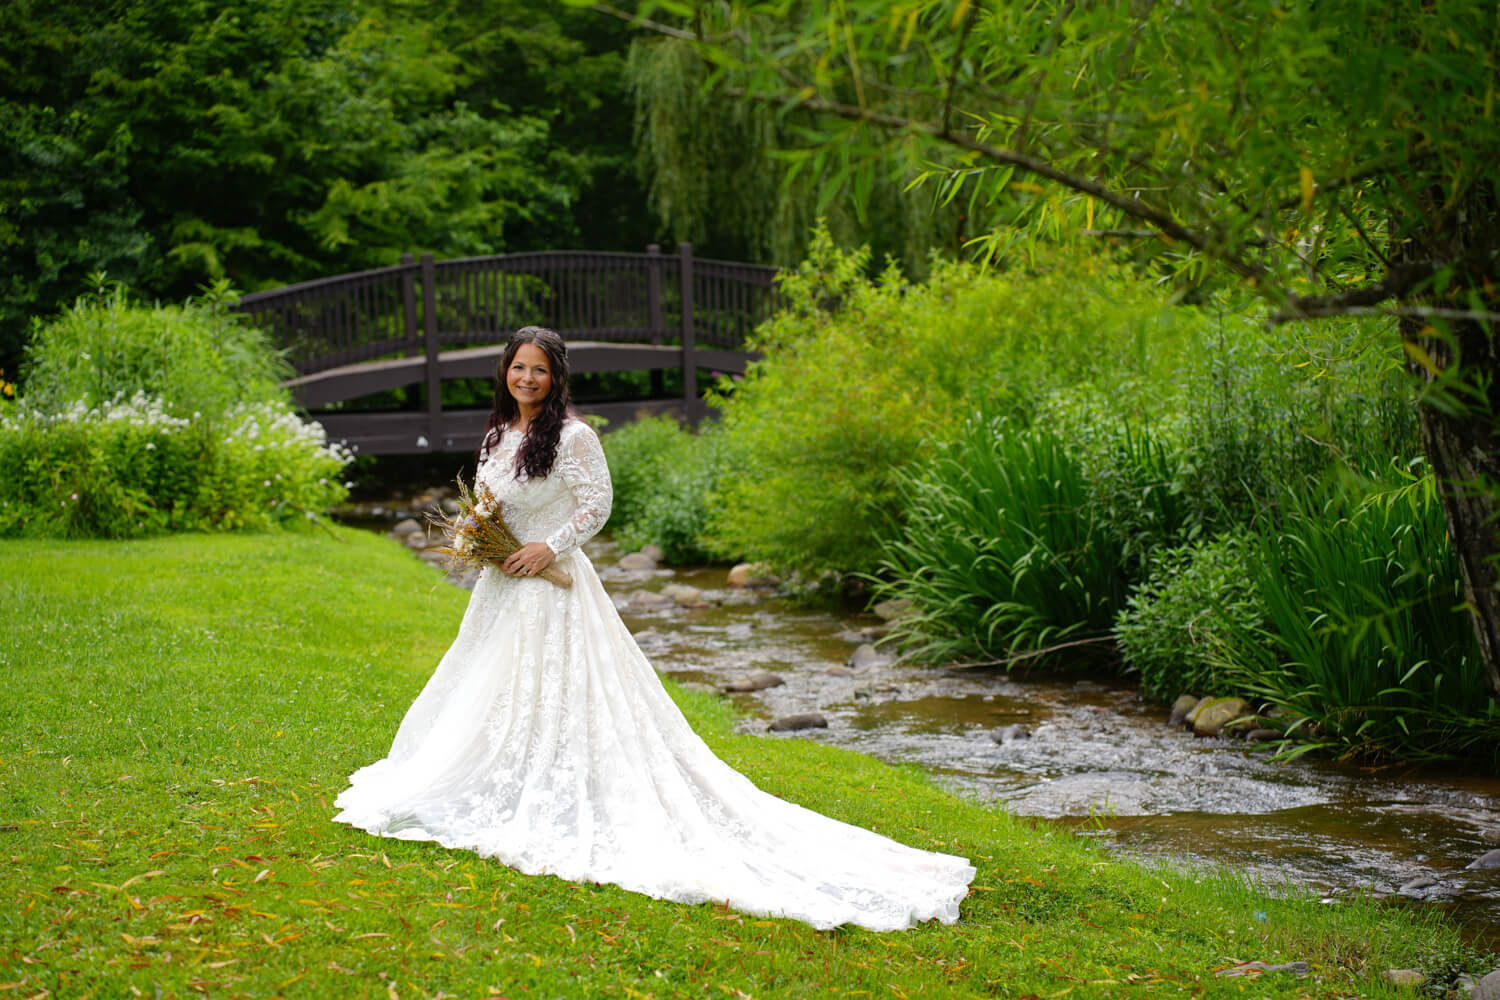 Bridal portrait by a creek and arched bridge at Honeysuckle hills in Pigeon Forge